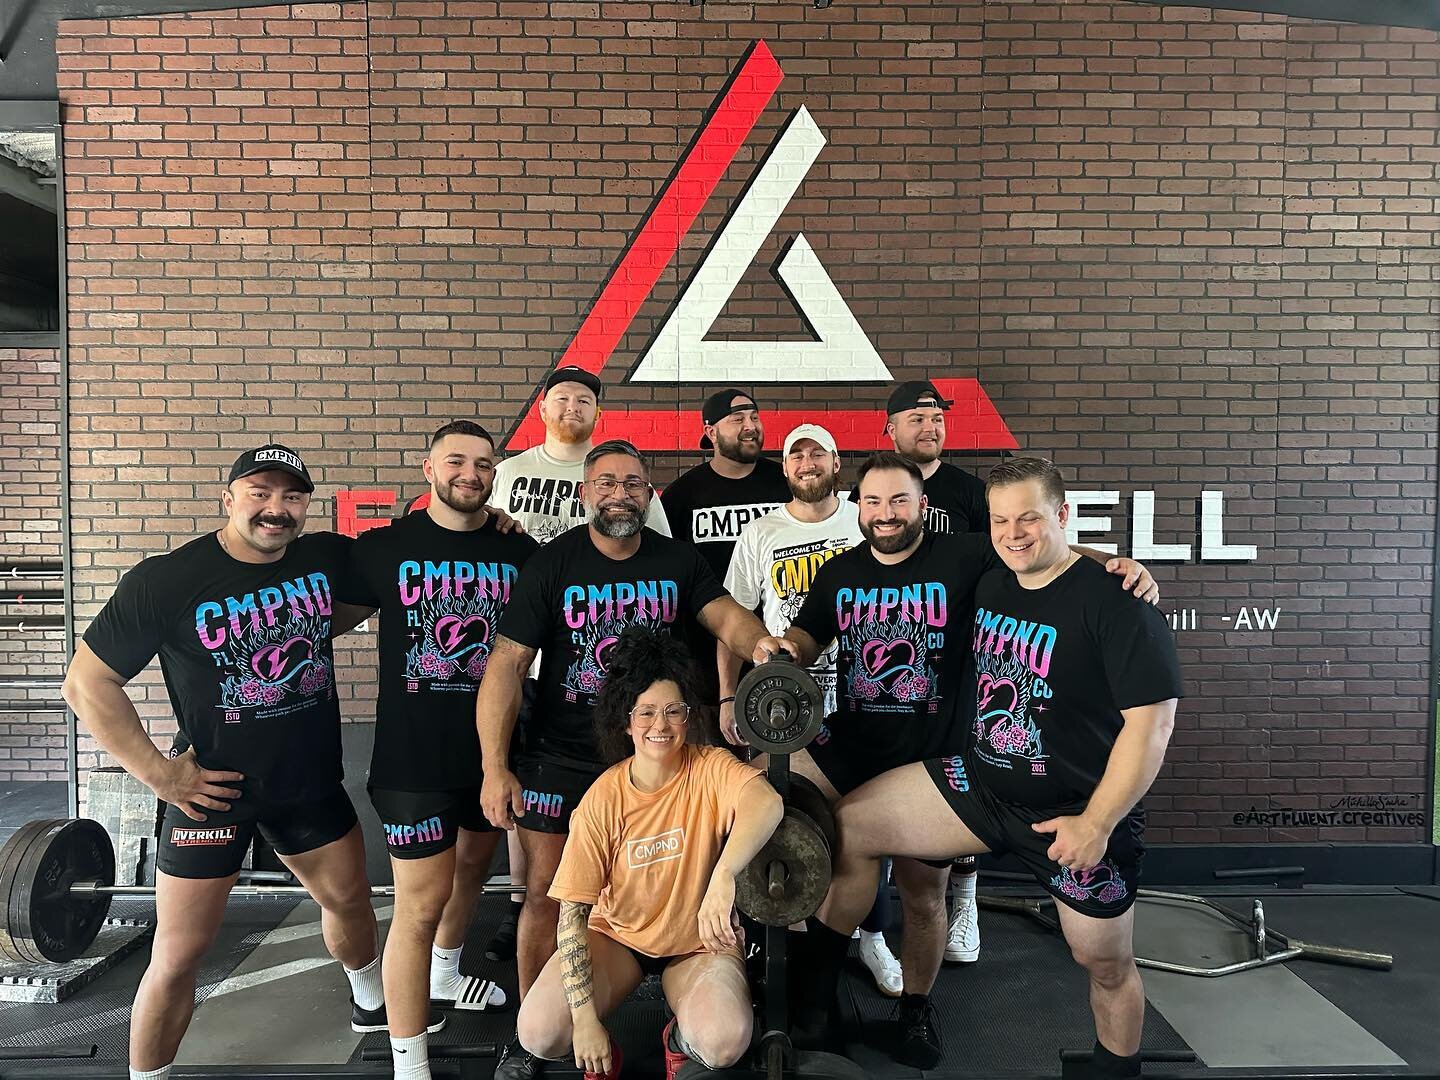 Sunday&rsquo;s with the crew!!! 

Shoutout to @_tactically_acquired @cmpnd_apparel for the continual support and all you do for the community!! 

#powerlifting#squatsundays